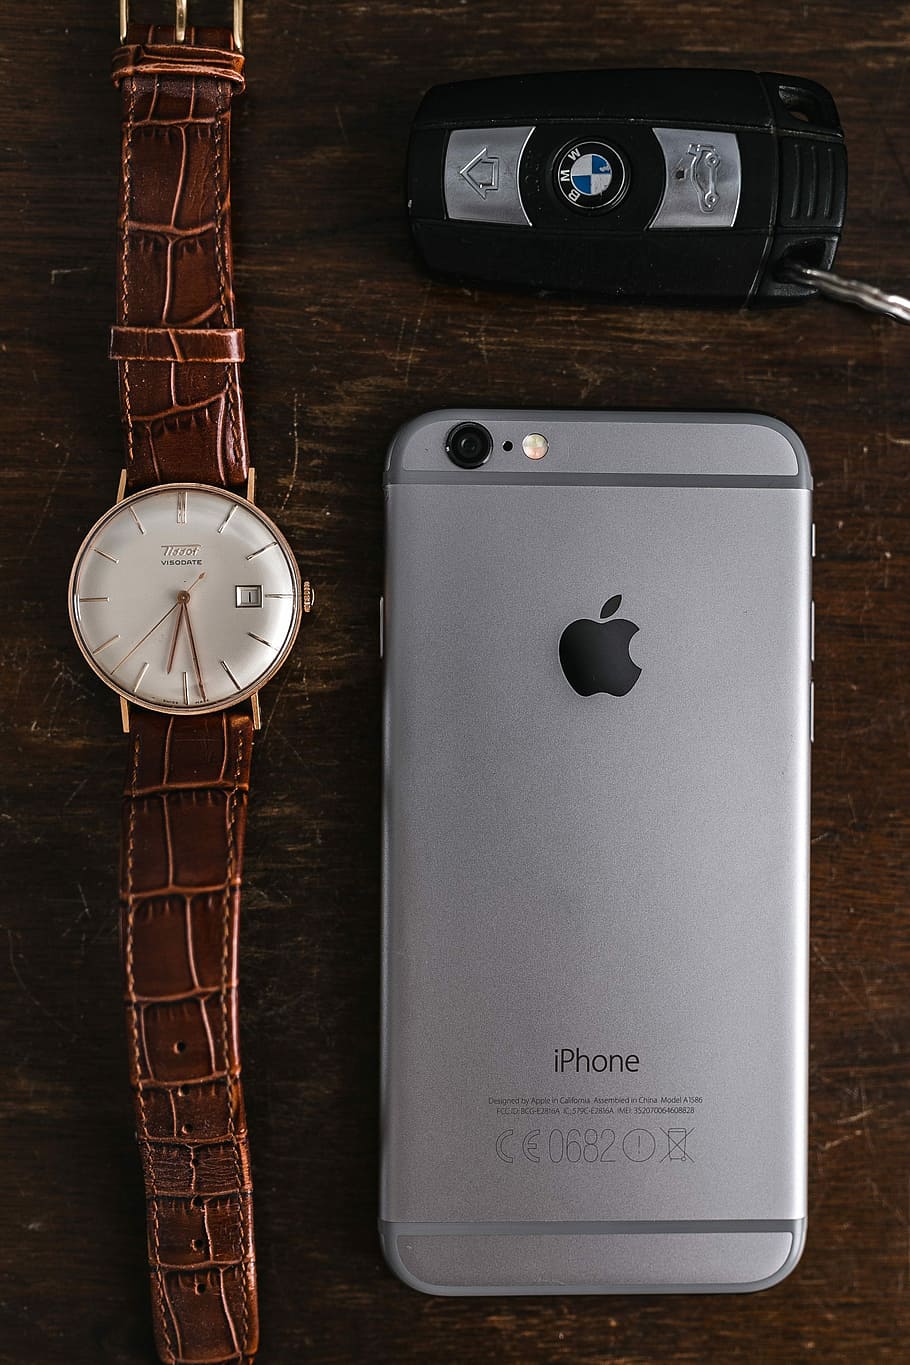 Apple iPhone 6 and Vintage watch on a brown leather wallet, technology, HD wallpaper